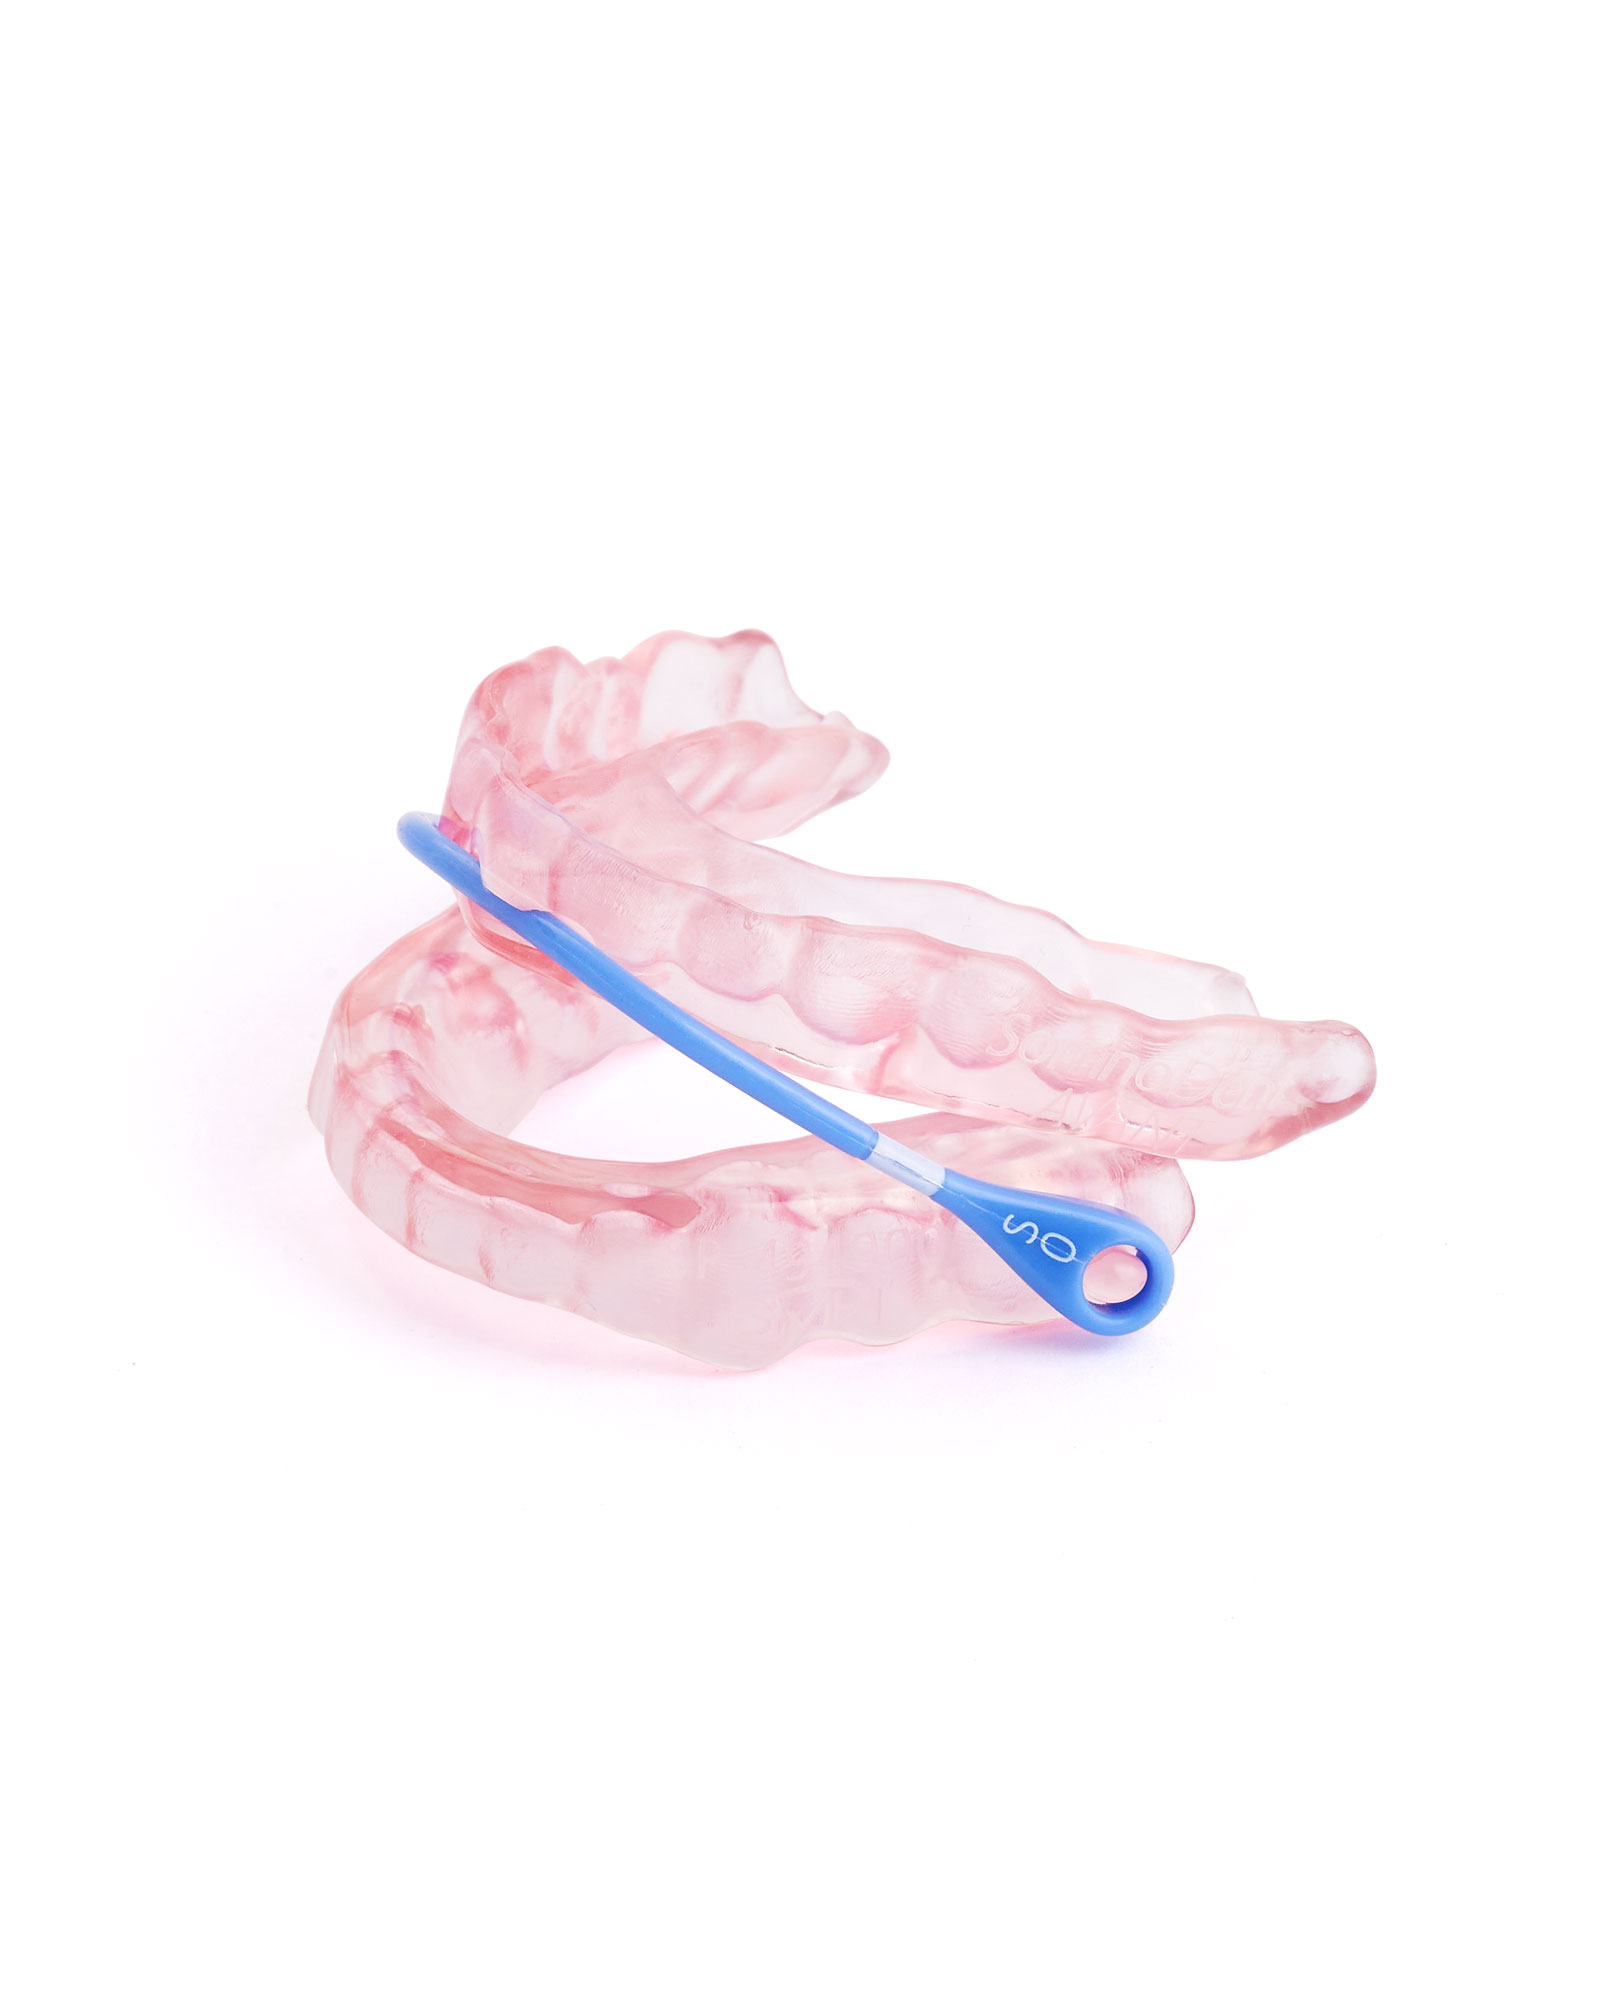 a clear plastic retainer with a blue handle